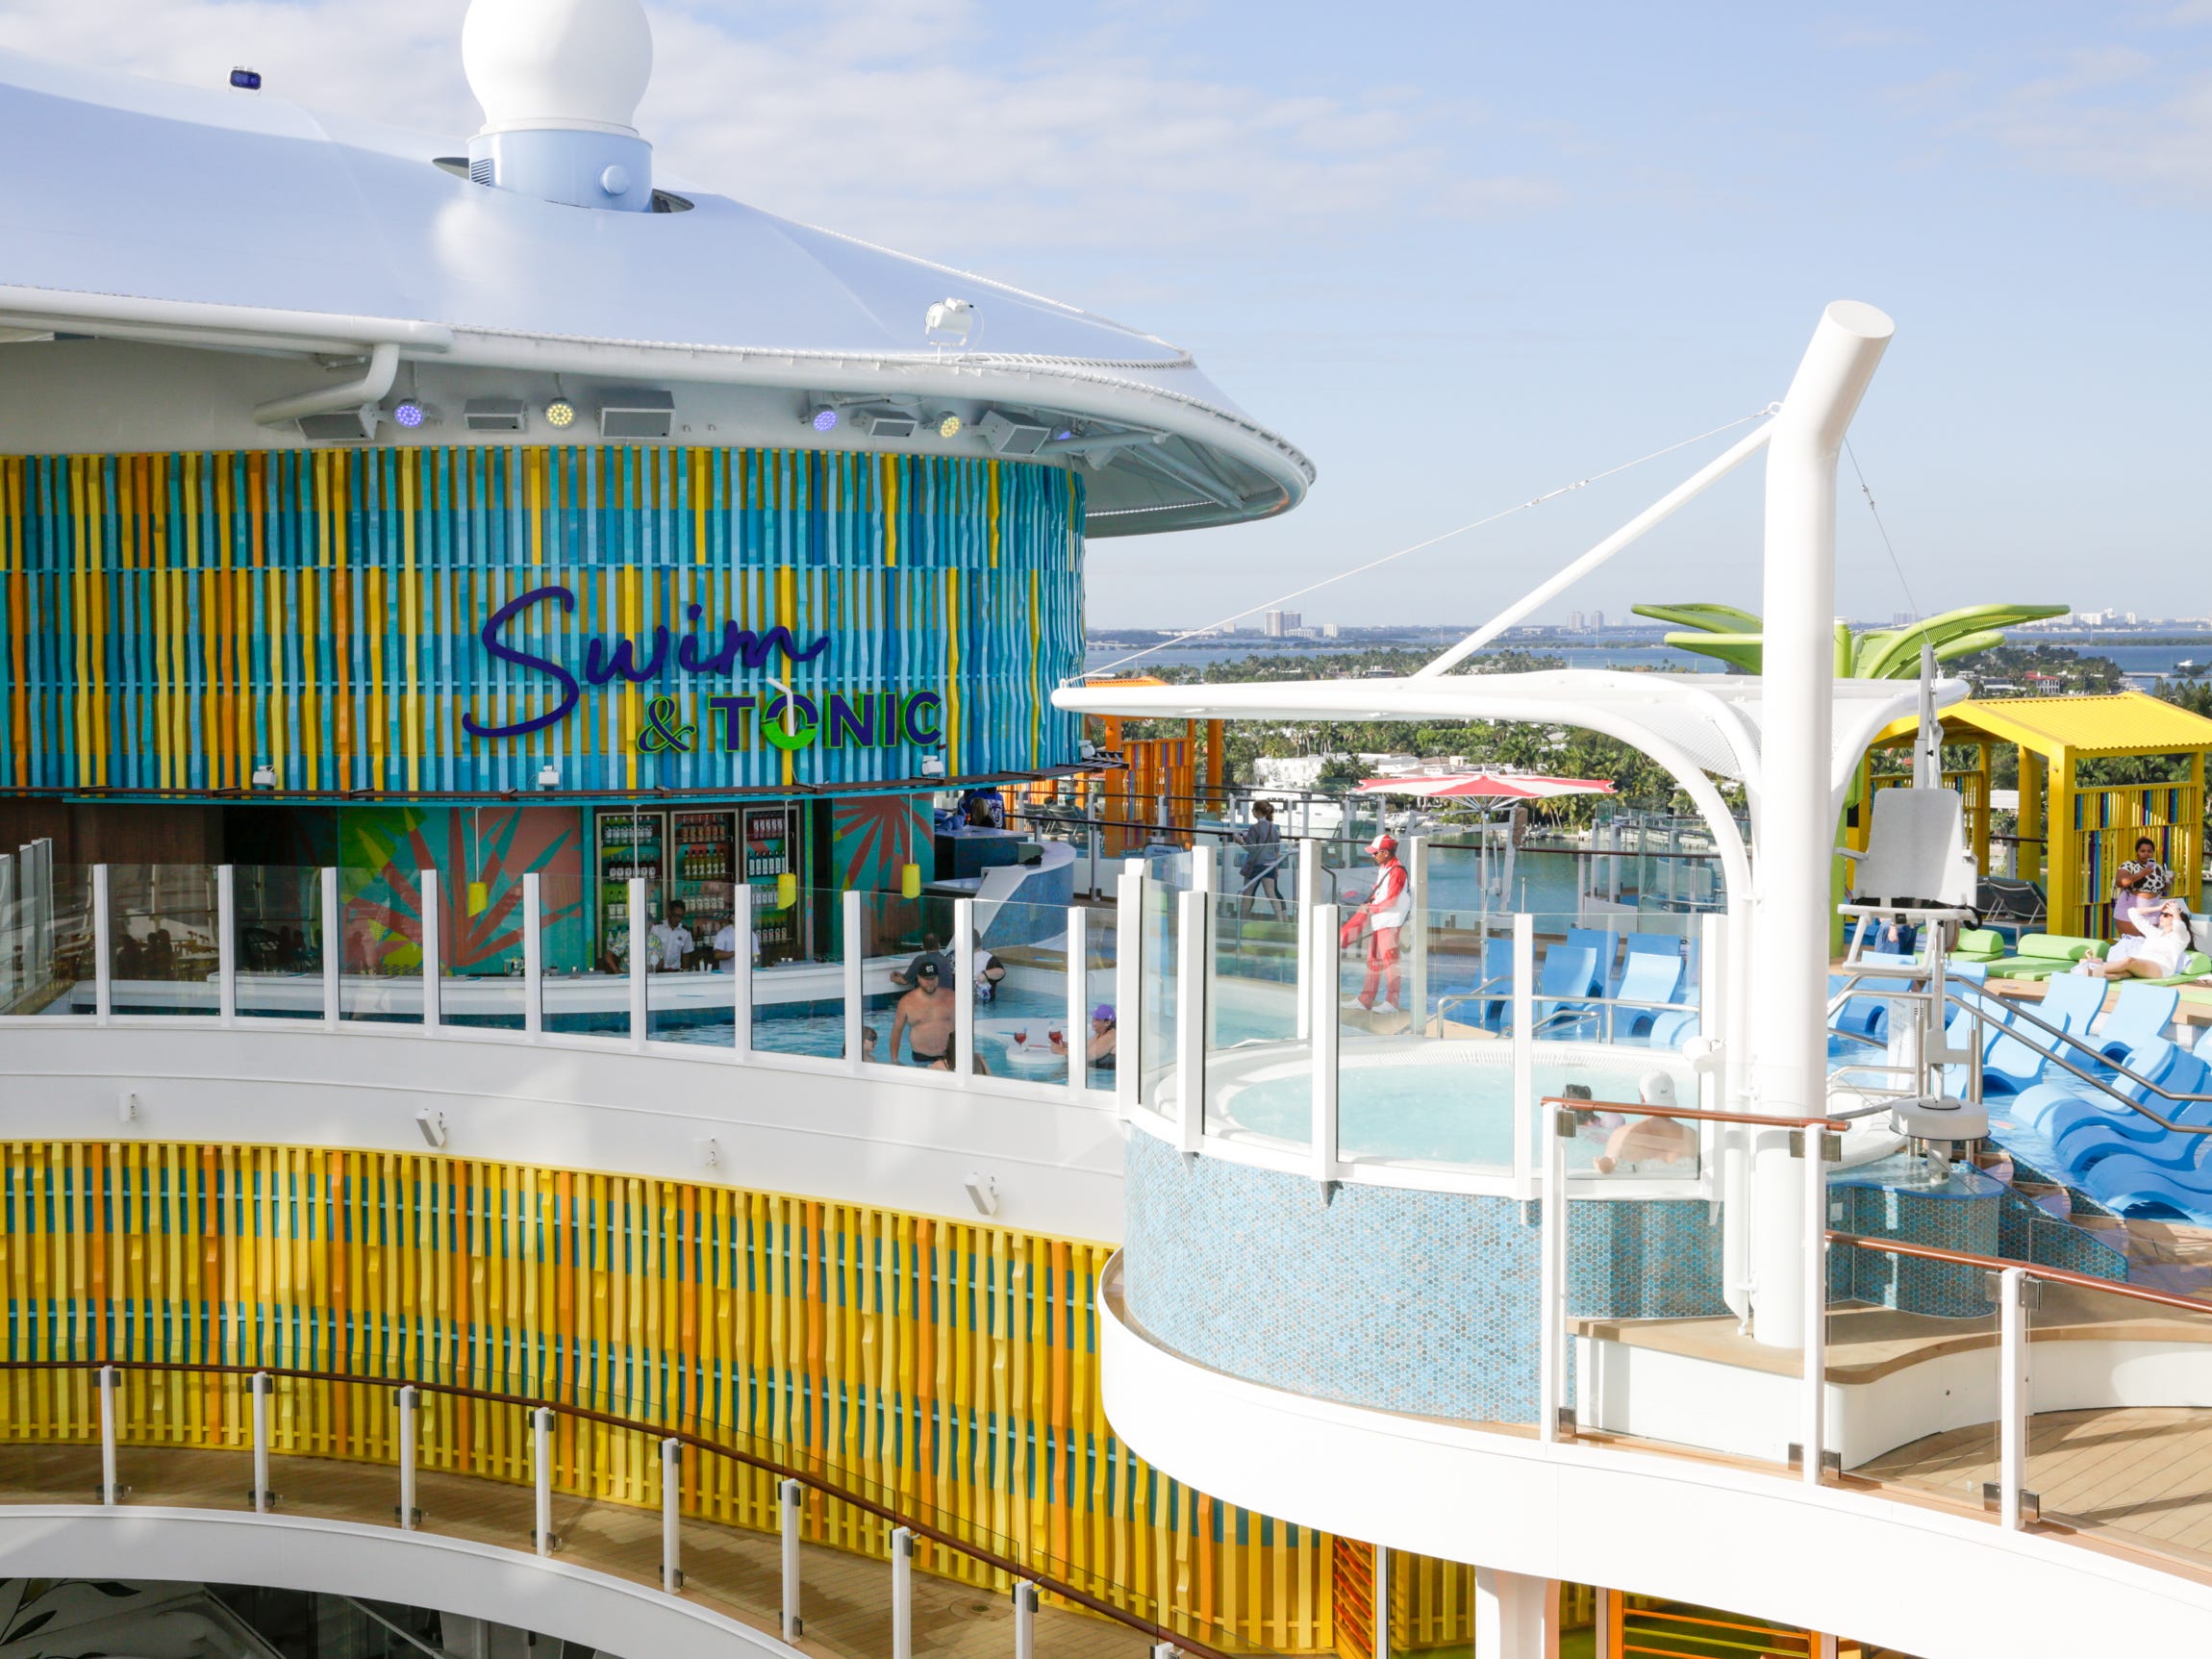 <p>College Me would've been delighted by the swim-up bar, walk-up Champagne kiosk, and do-it-yourself bar crawl at the <a href="https://www.businessinsider.com/royal-caribbean-wonder-of-the-seas-worlds-largest-cruise-tour-2022-12#this-karaoke-bar-is-centered-in-the-royal-promenade-neighborhood-42">Royal Promenade</a>.</p><p>However, boring Adult Me was surprisingly satisfied with every watering hole's "mocktail" options.</p>